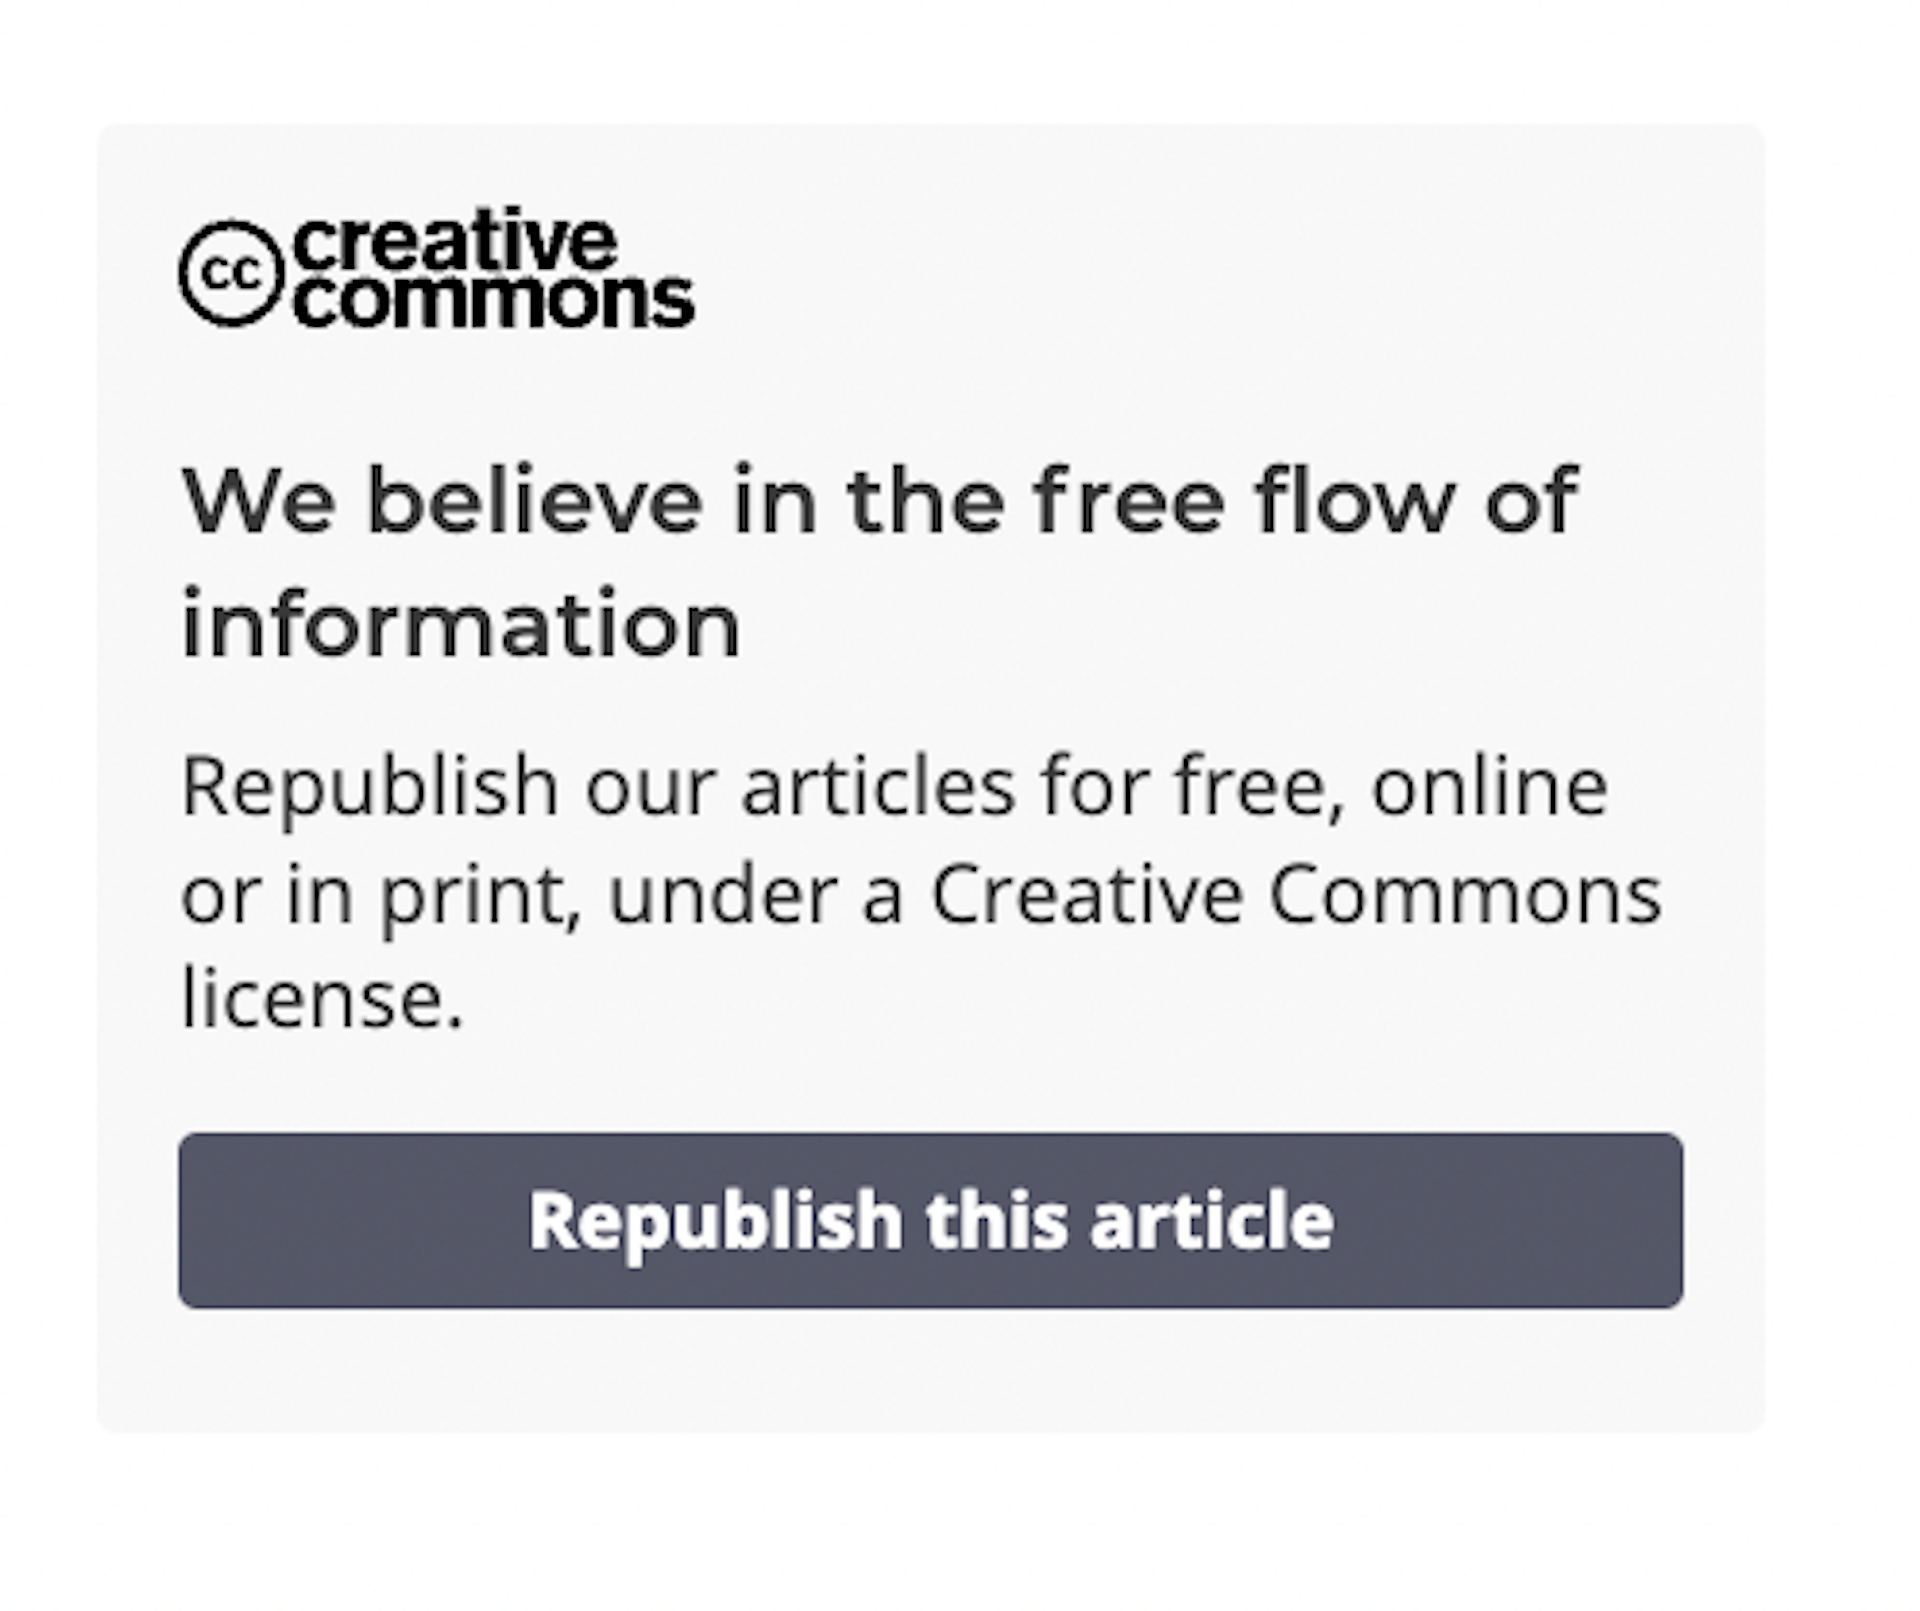 We believe in the free flow of information. Republish our articles for free, online or in print, under a Creative Commons license.  (Button: Republish this article)